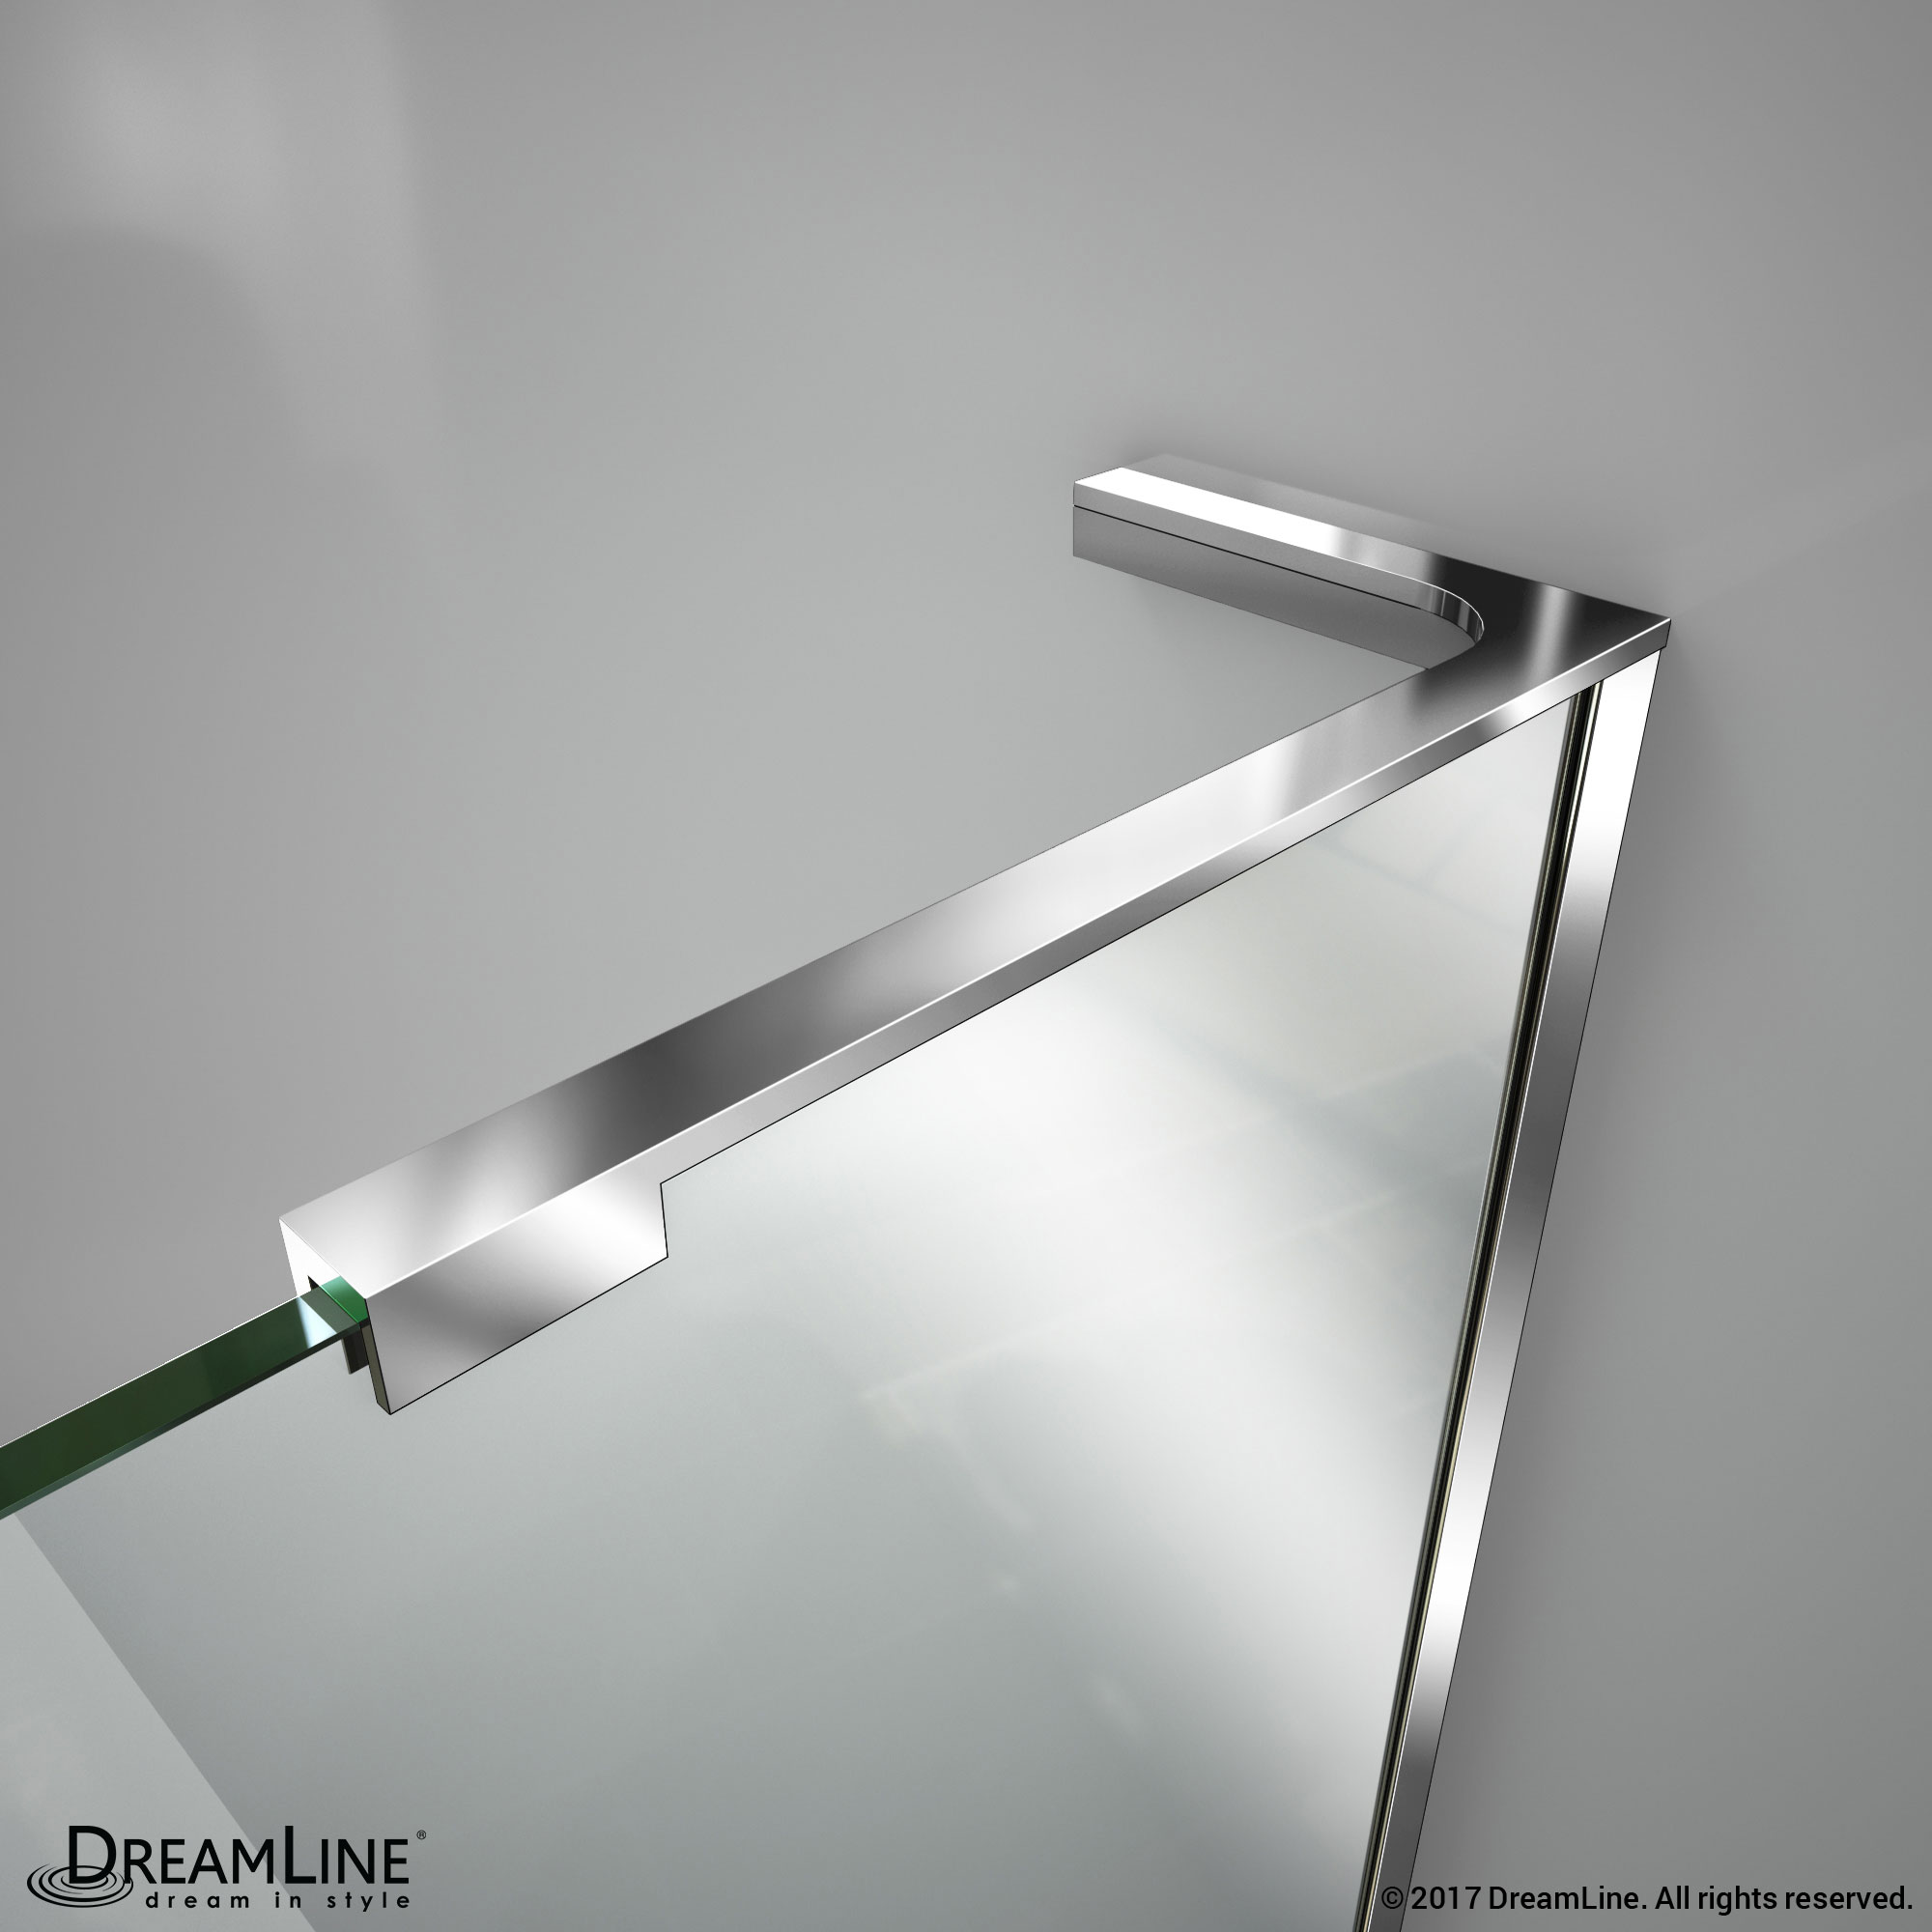 DreamLine Unidoor Lux 54 in. W x 72 in. H Fully Frameless Hinged Shower Door with L-Bar in Chrome